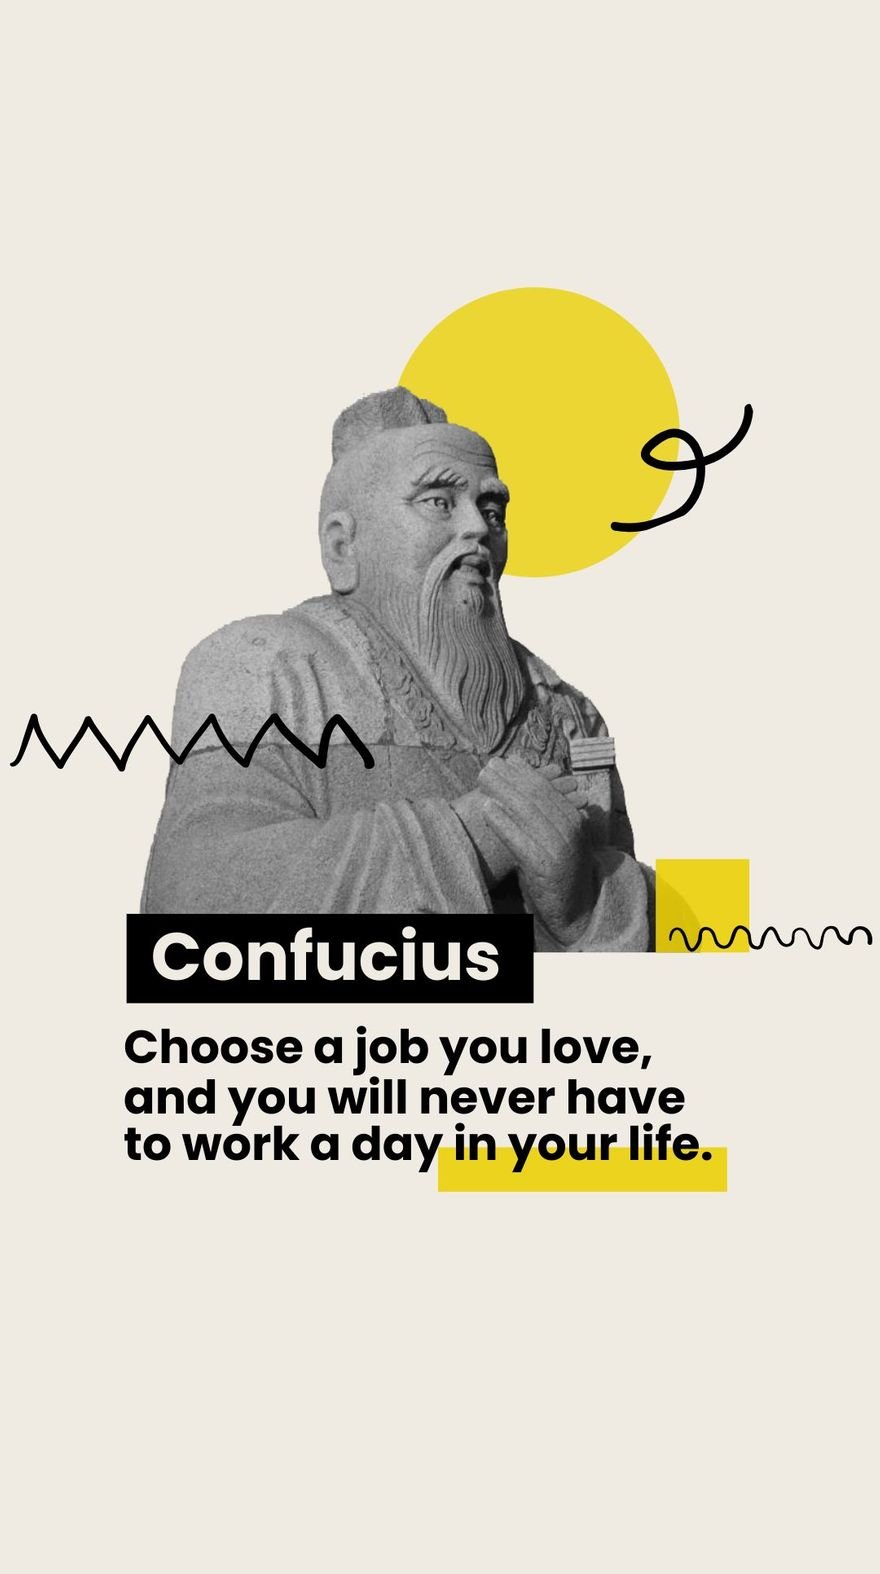 Confucius - Choose a job you love, and you will never have to work a day in your life. in JPG